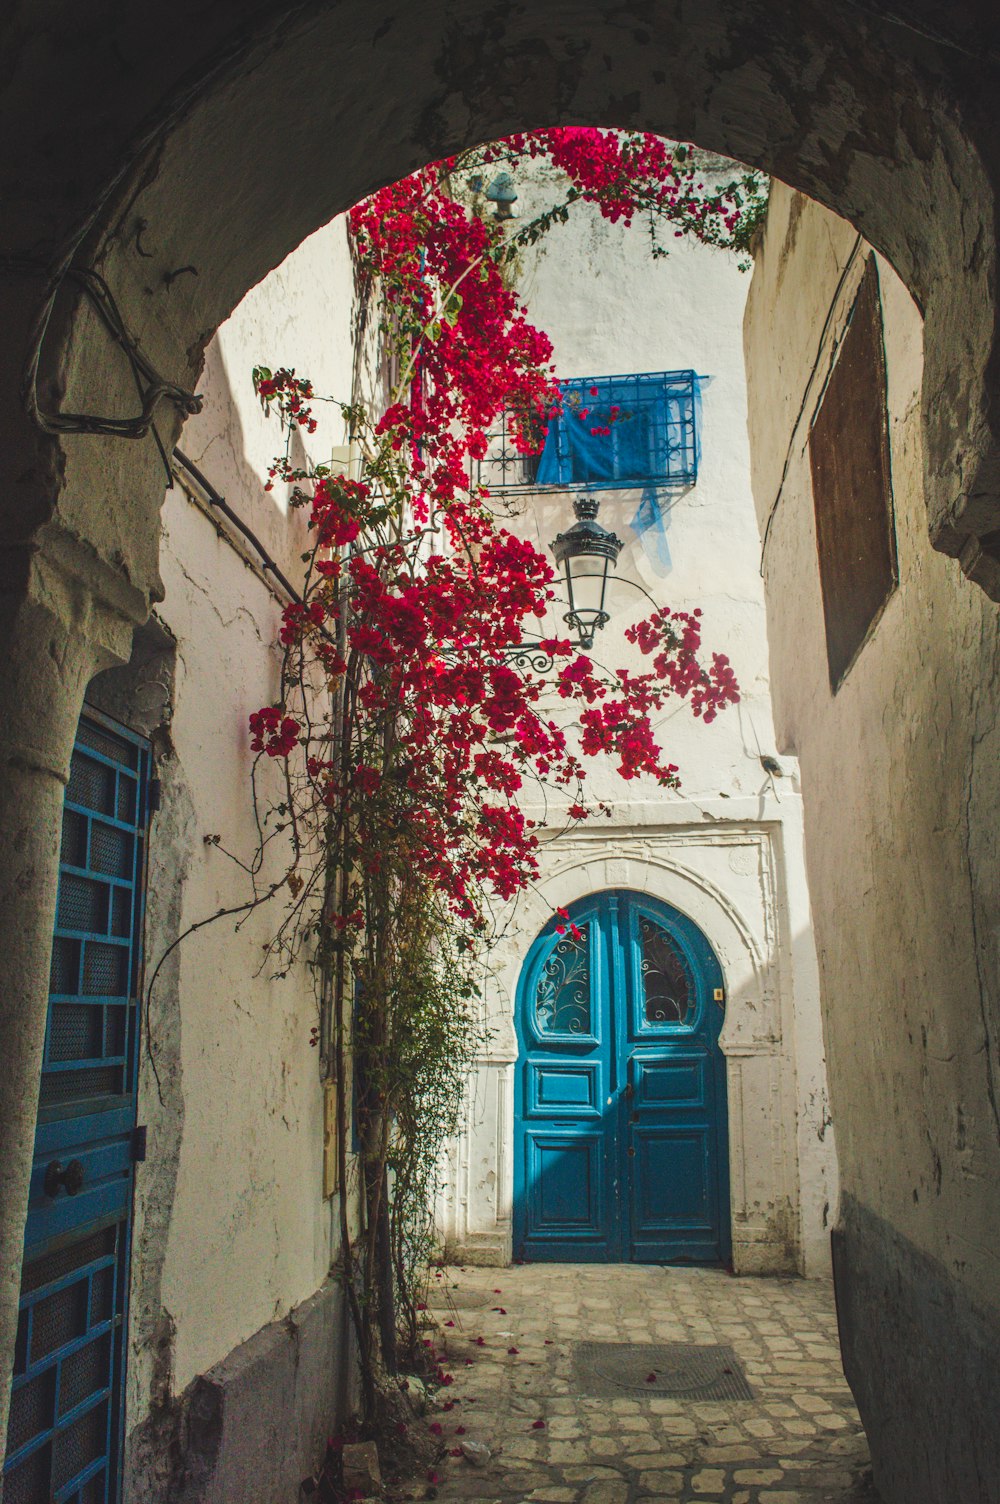 a narrow alleyway with a blue door and red flowers